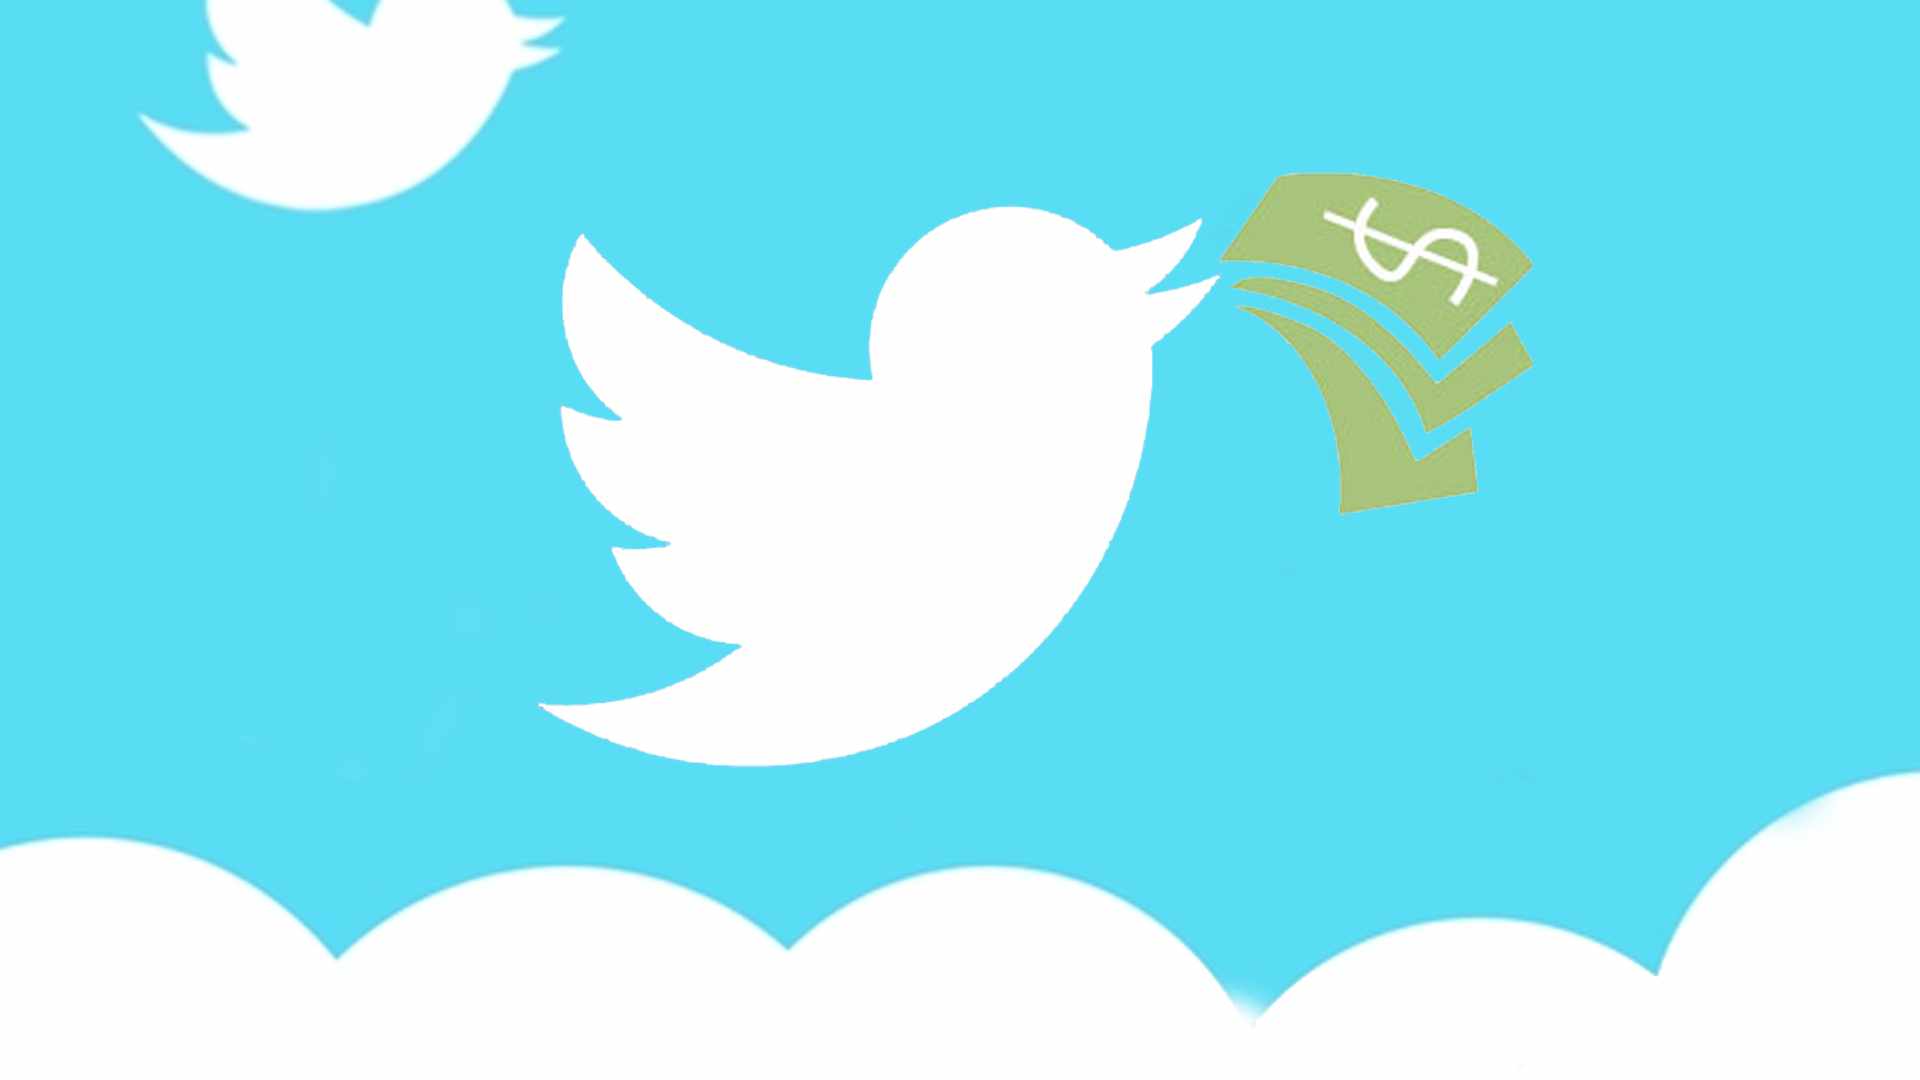 Getting Started on Twitter for Your Business